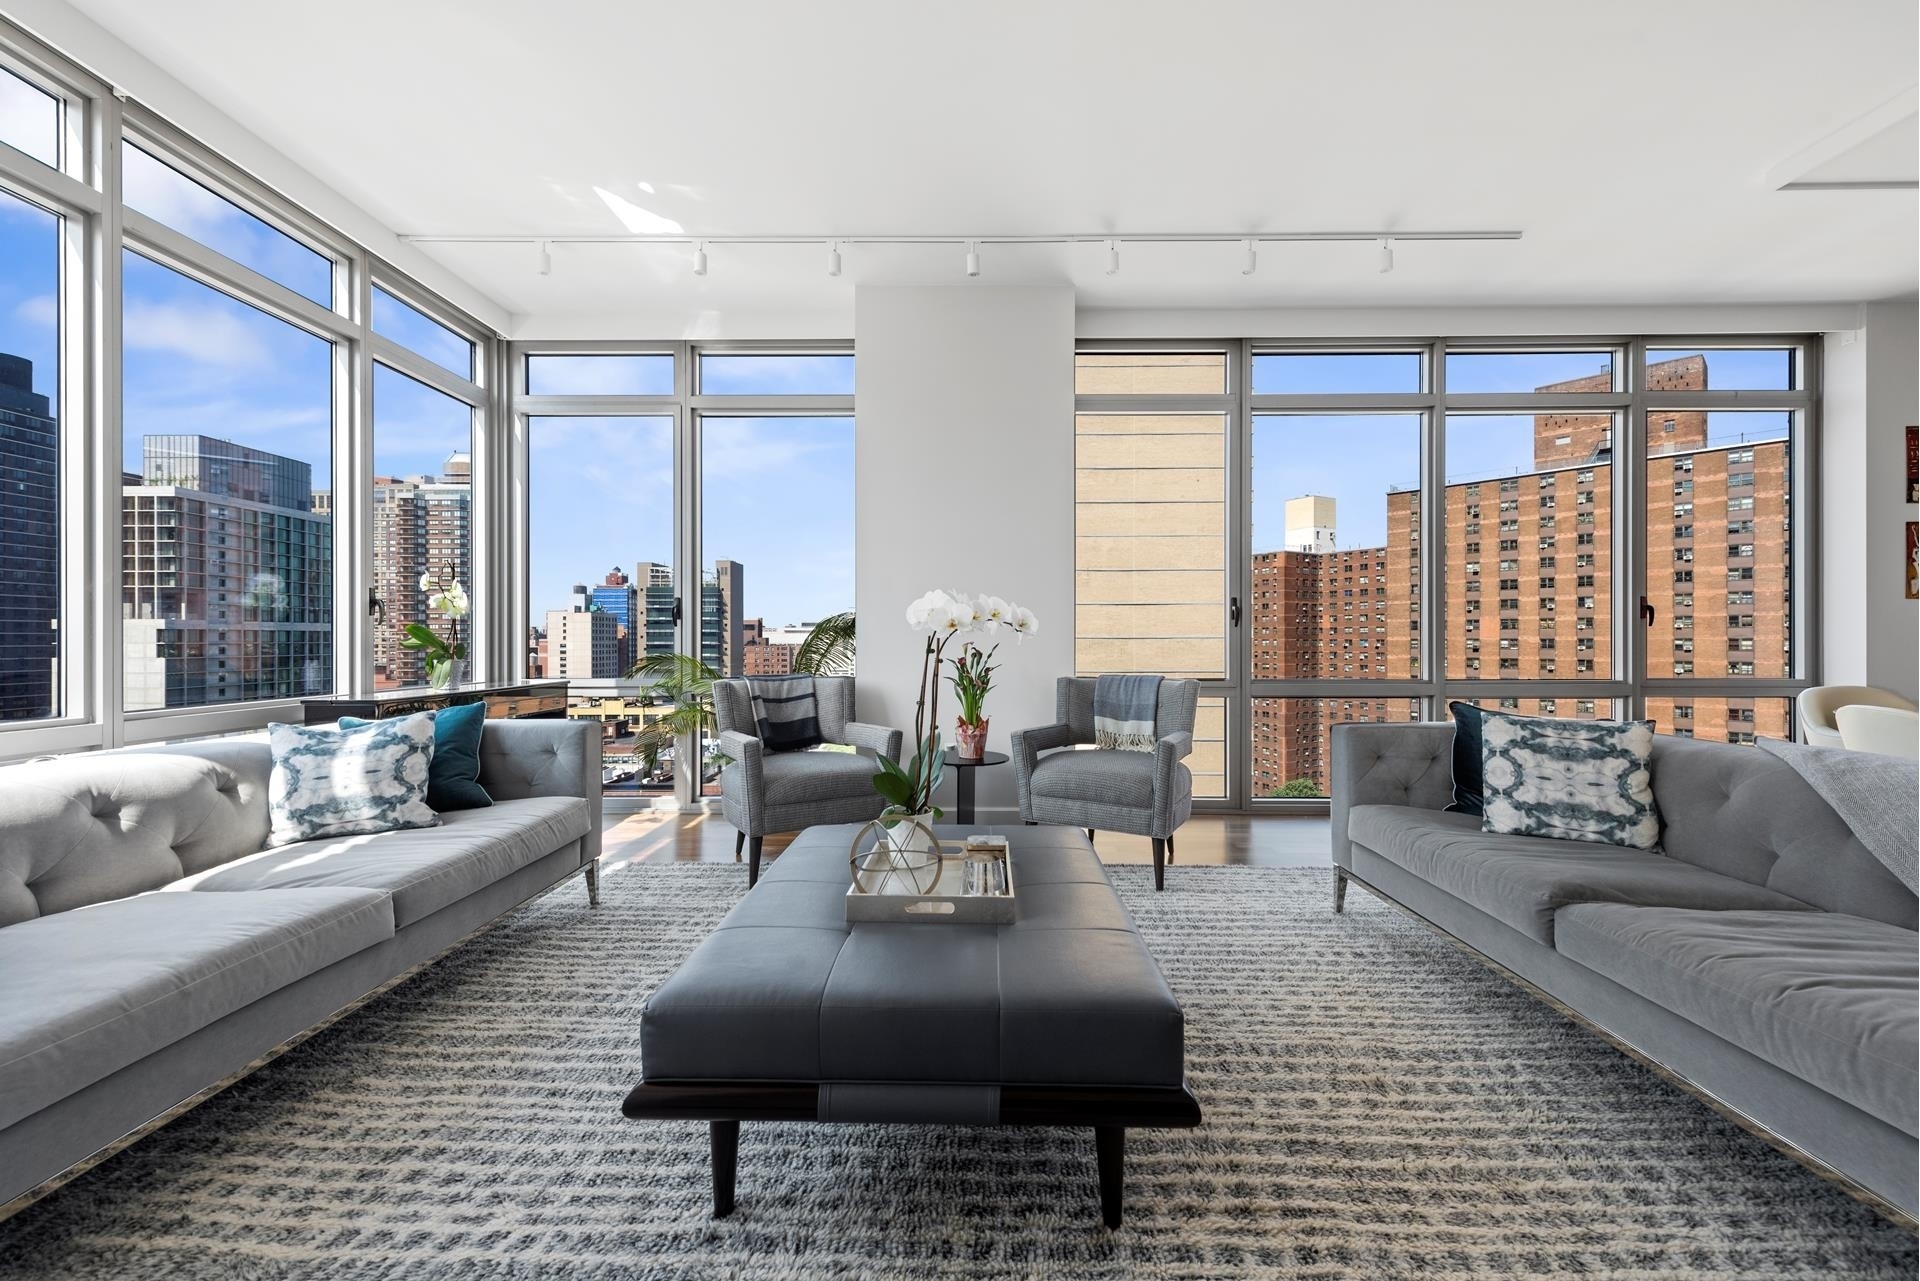 Property at Azure, 333 E 91ST ST , 15A New York